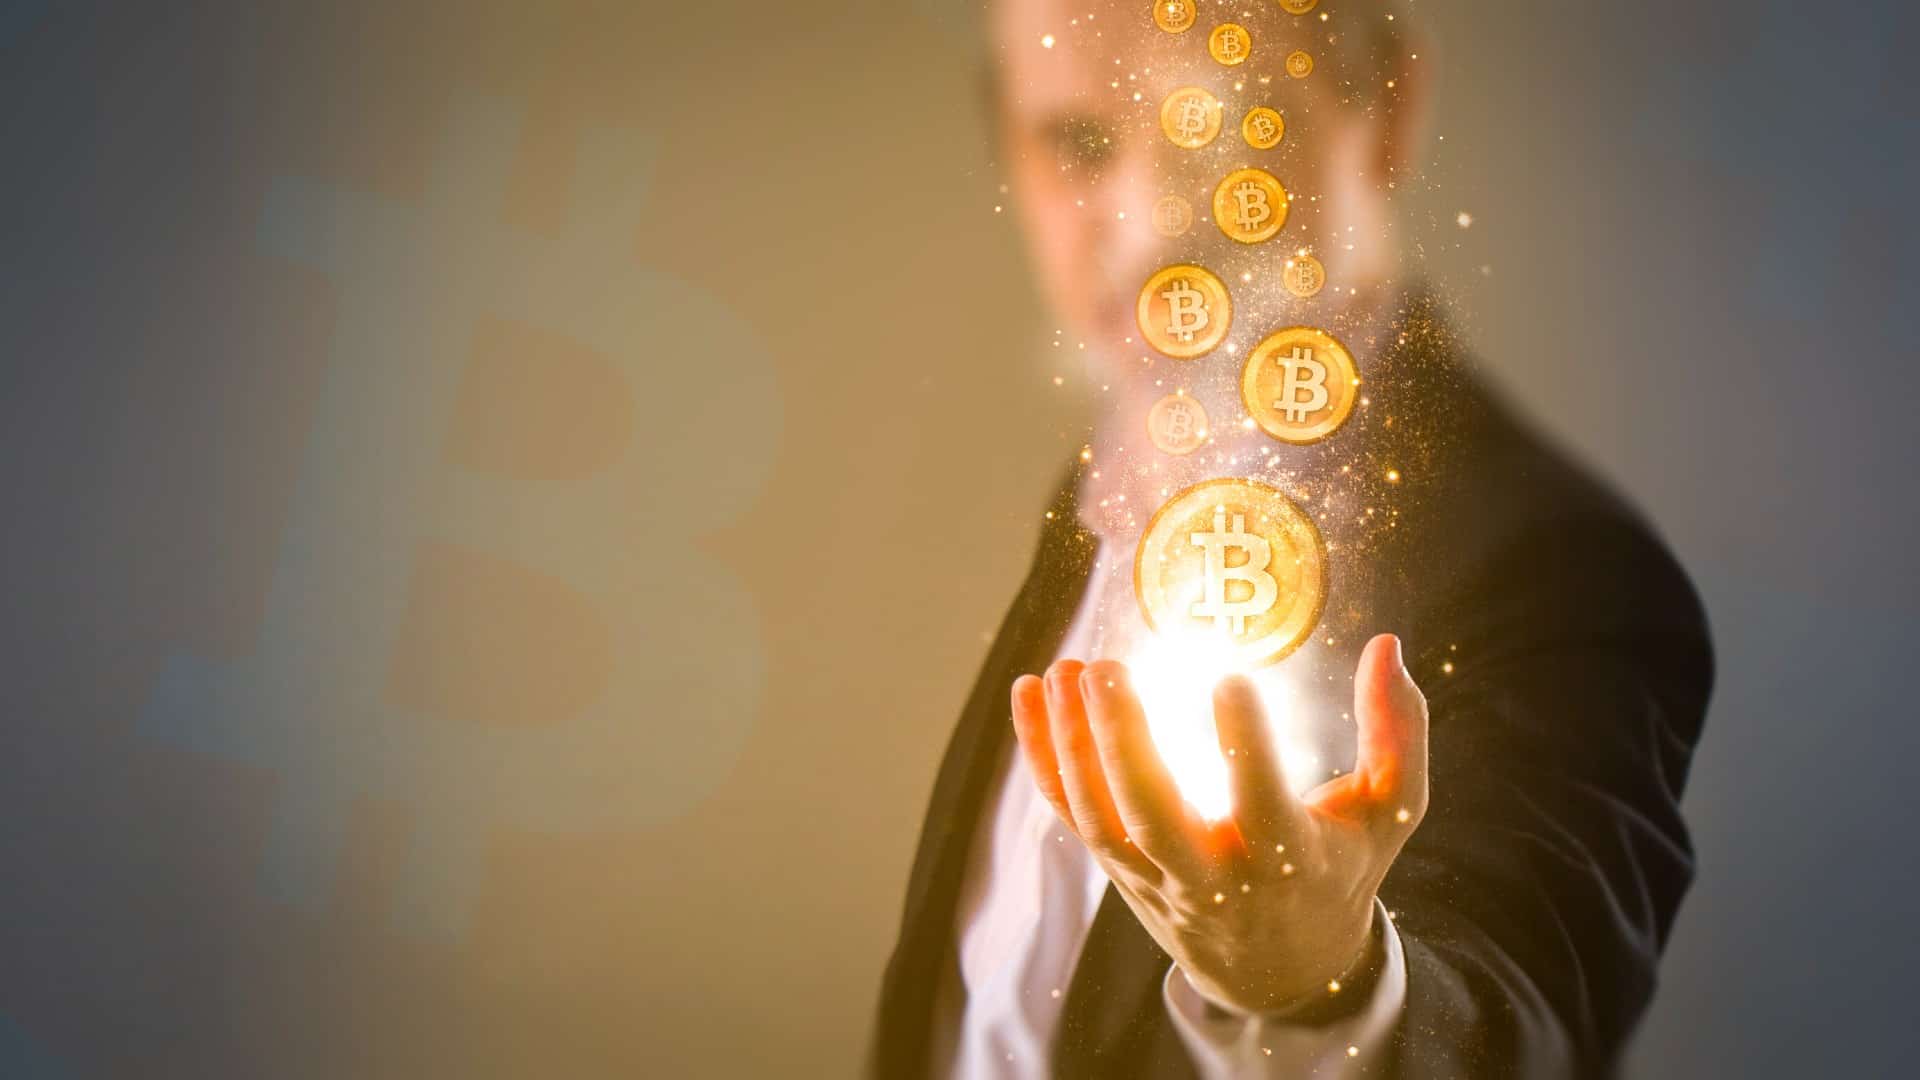 A rich buisnessman buys luxury items with Bitcoin